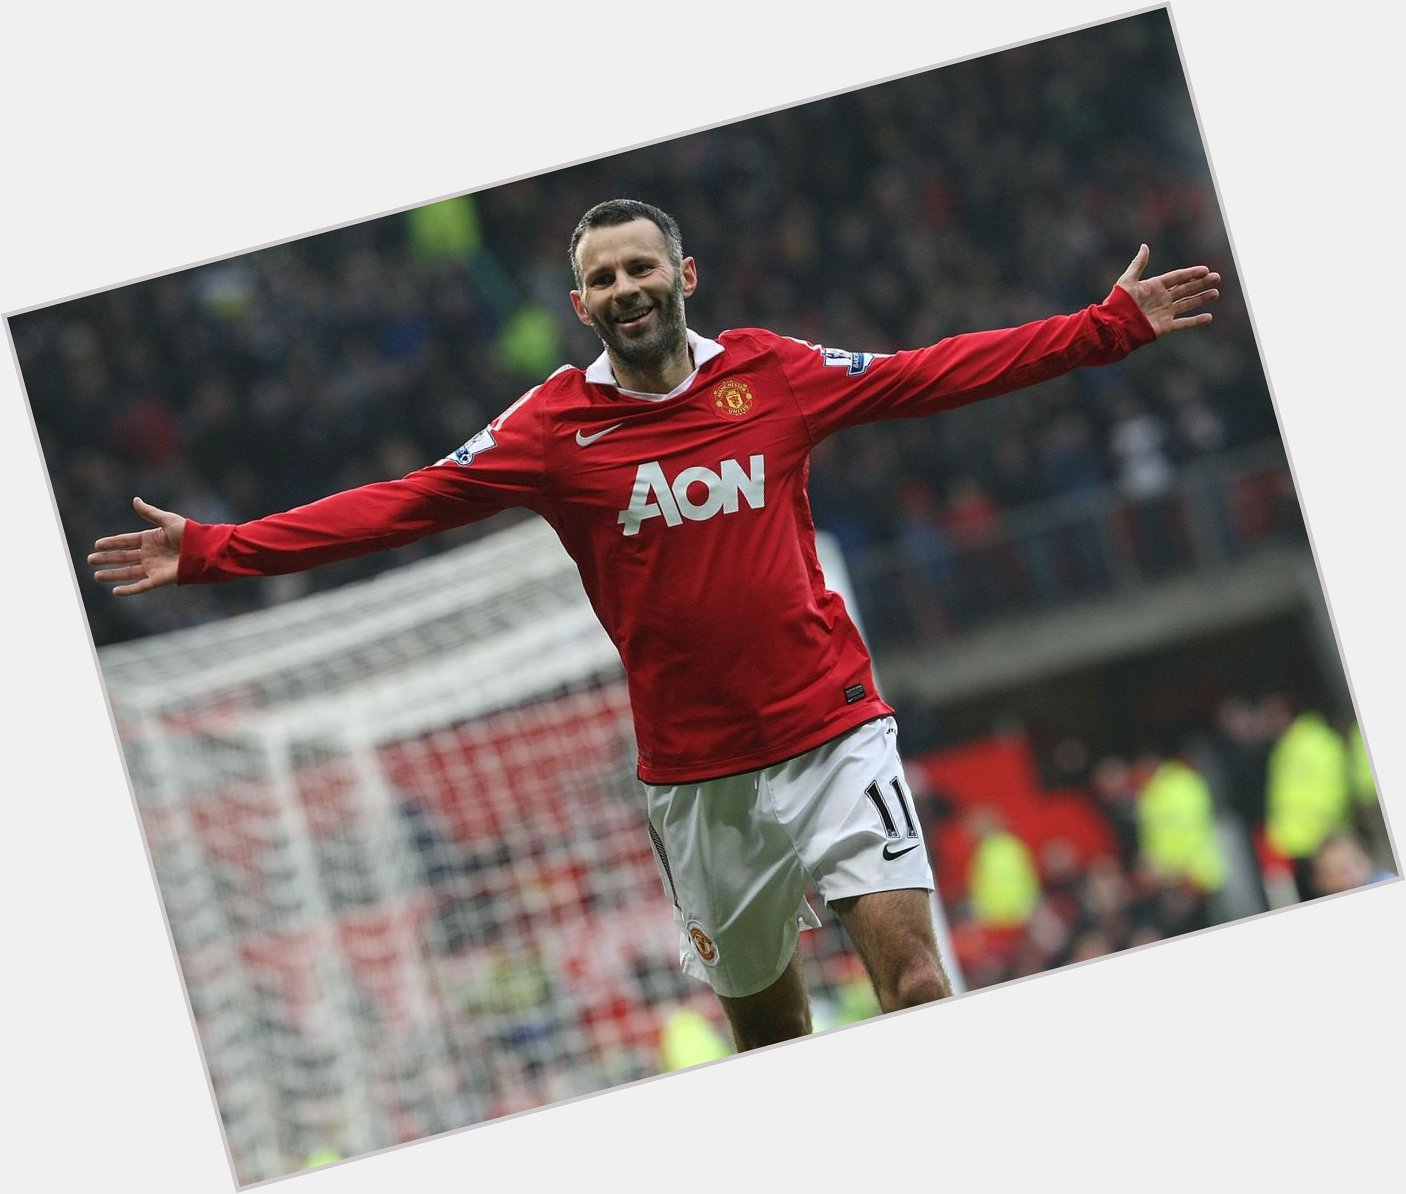 Happy birthday to the best Manchester United player ever! Ryan Giggs turns 48 today. 